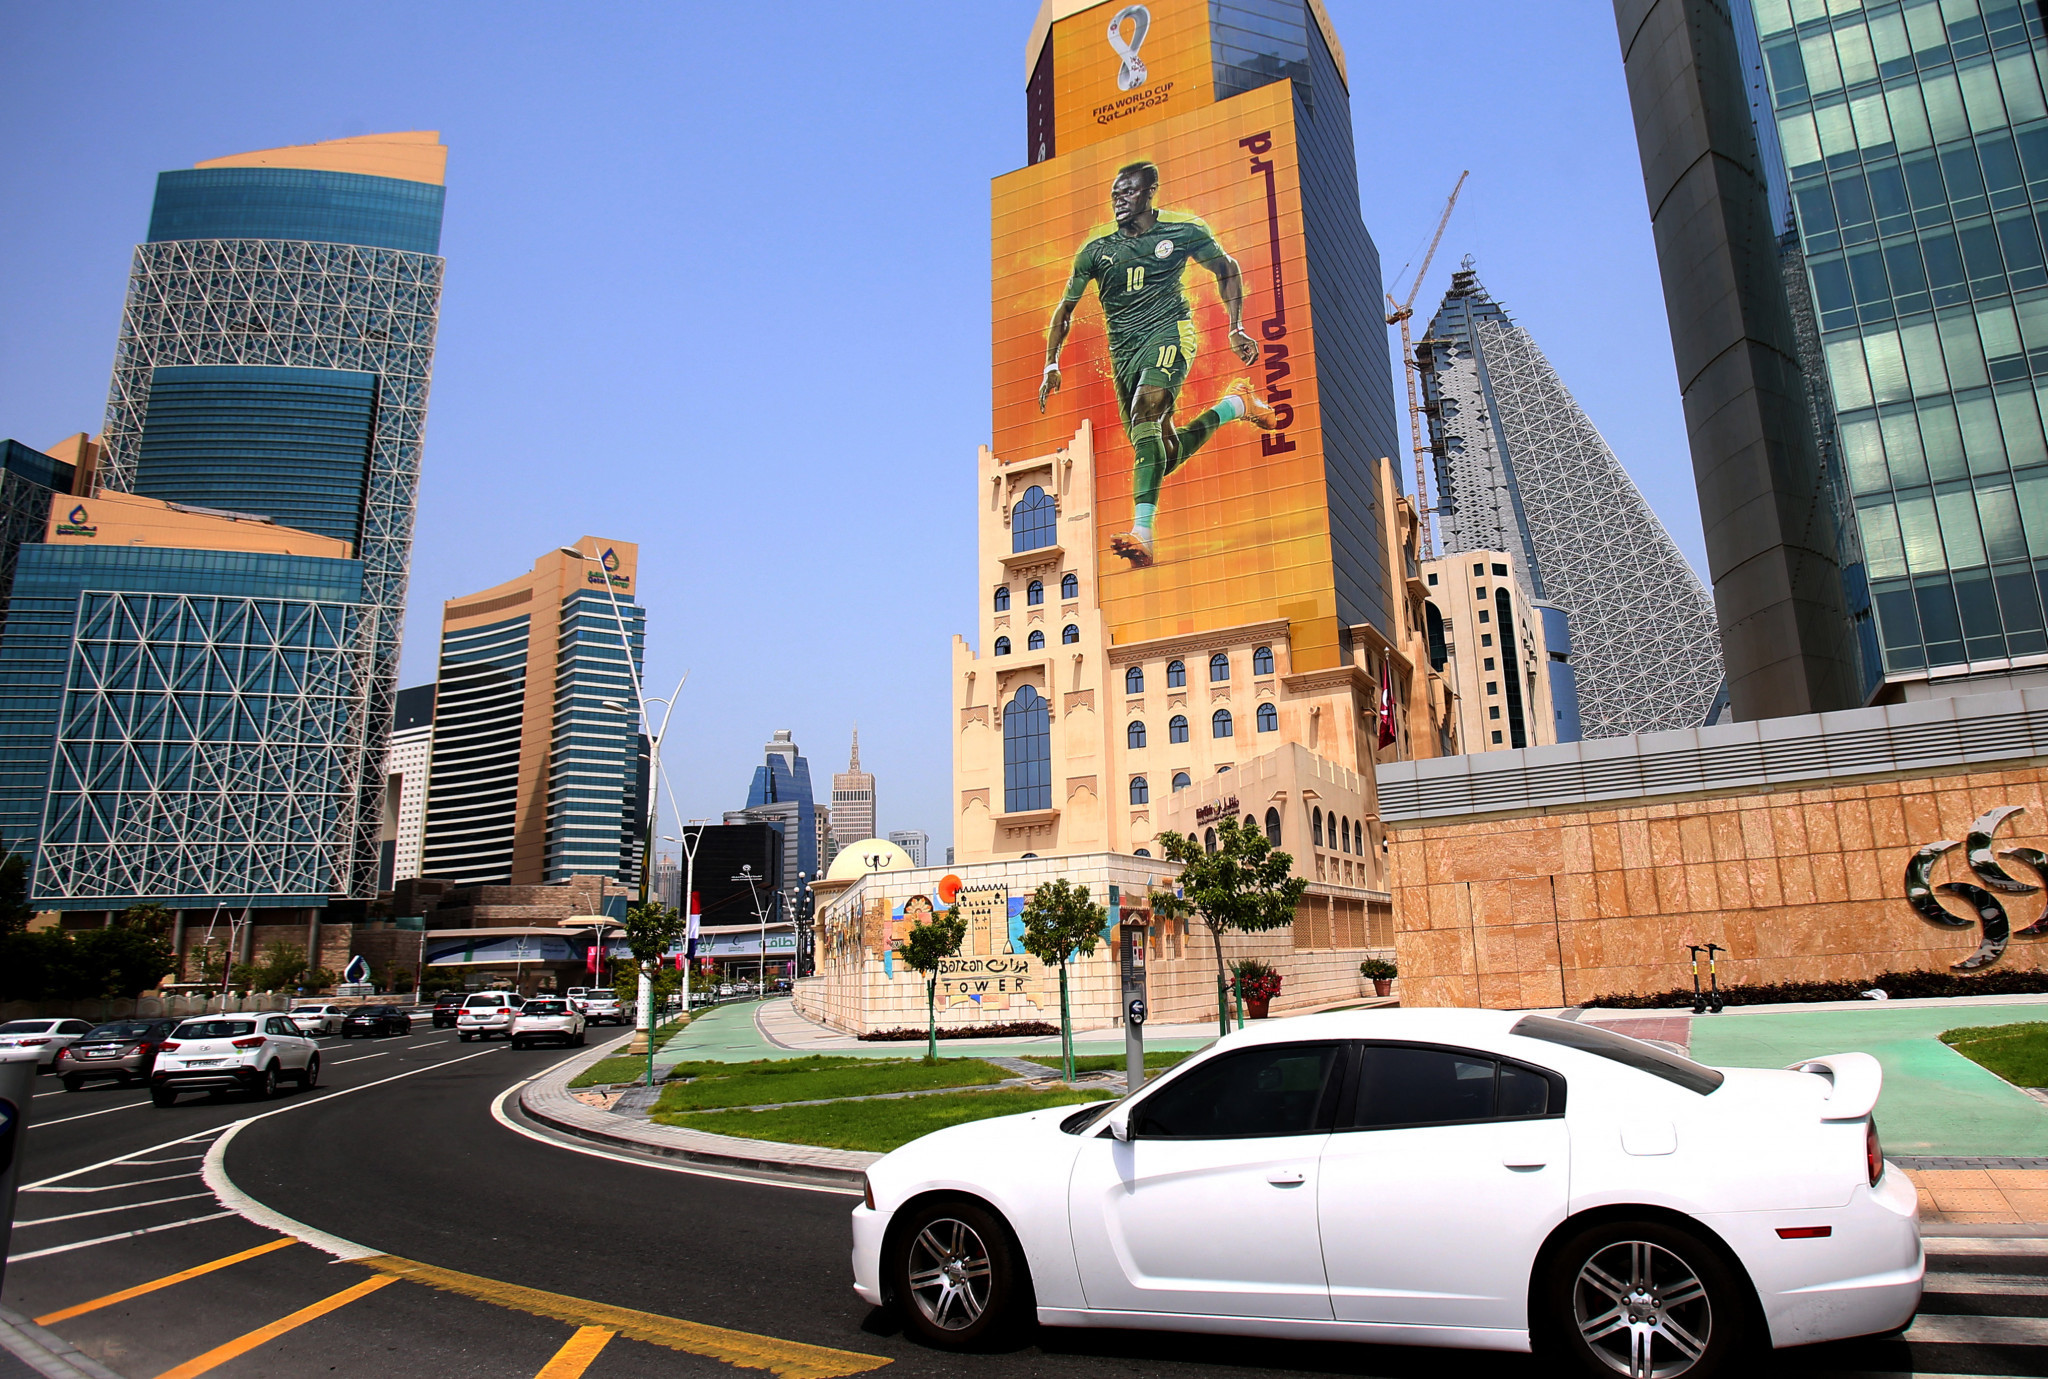 Qatari capital Doha is getting ready for the World Cup with huge posters of footballers seen on buildings around the city ©Getty Images
